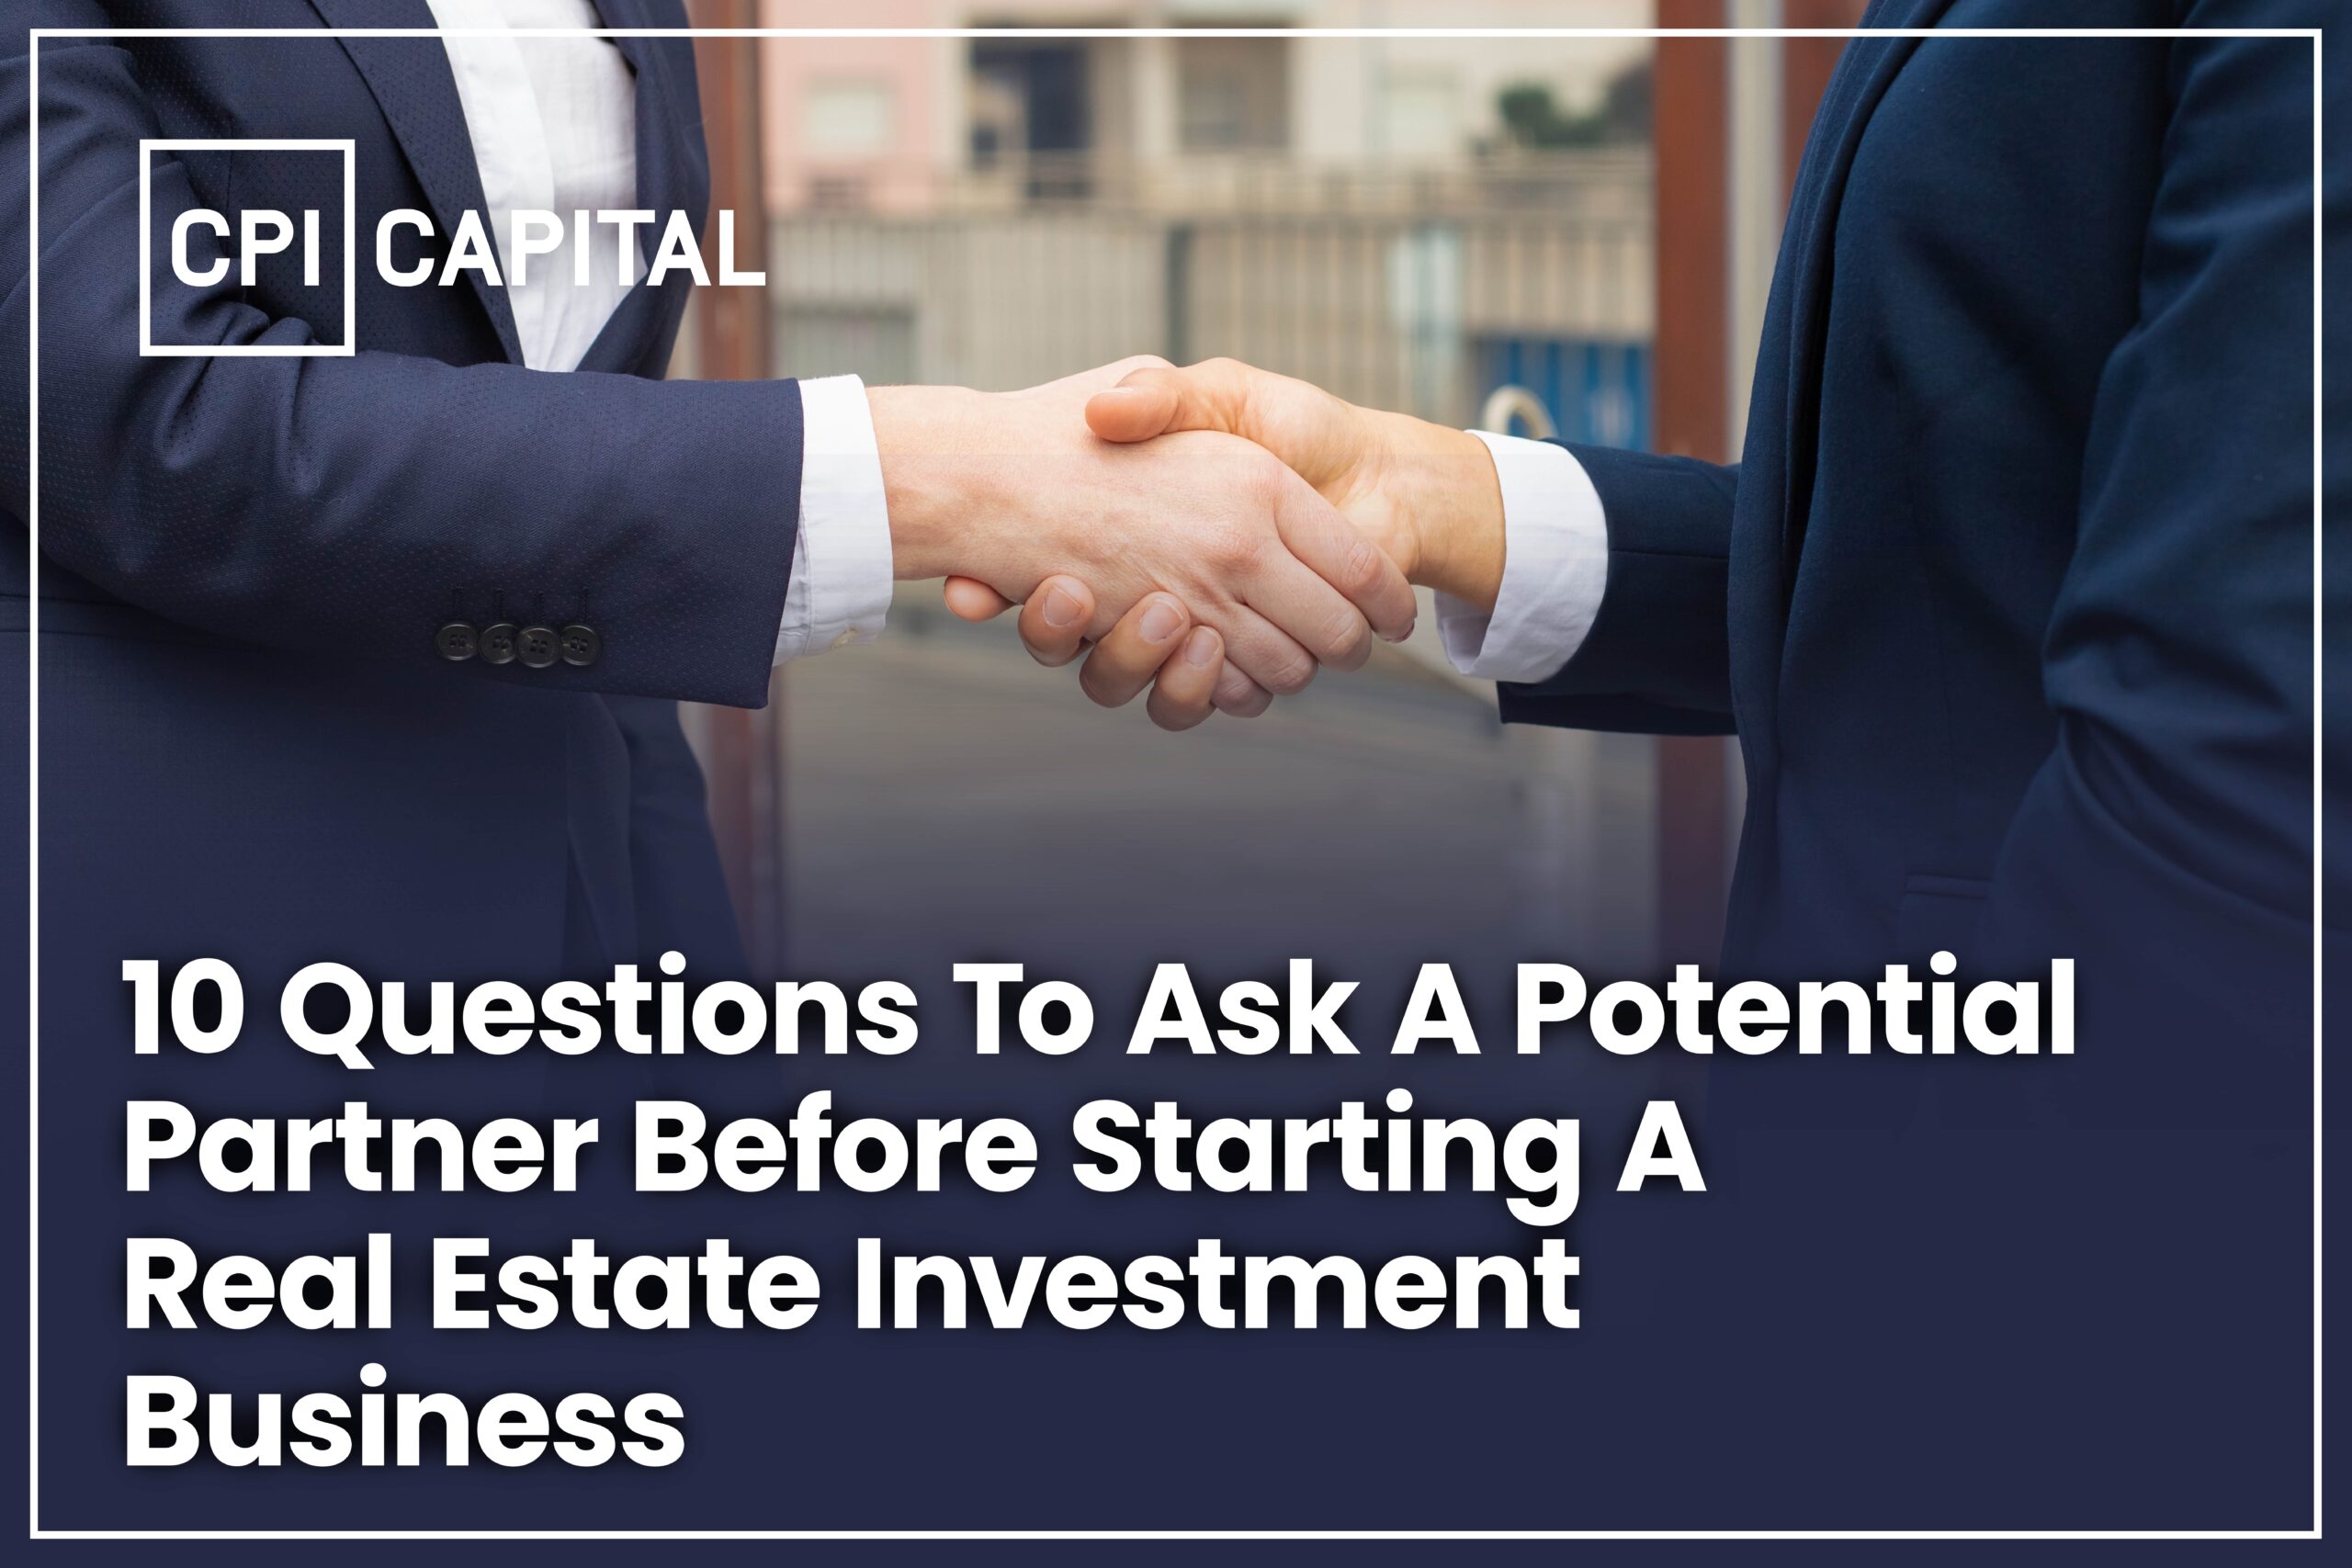 10 Questions To Ask A Potential Partner Before Starting A Real Estate Investment Business